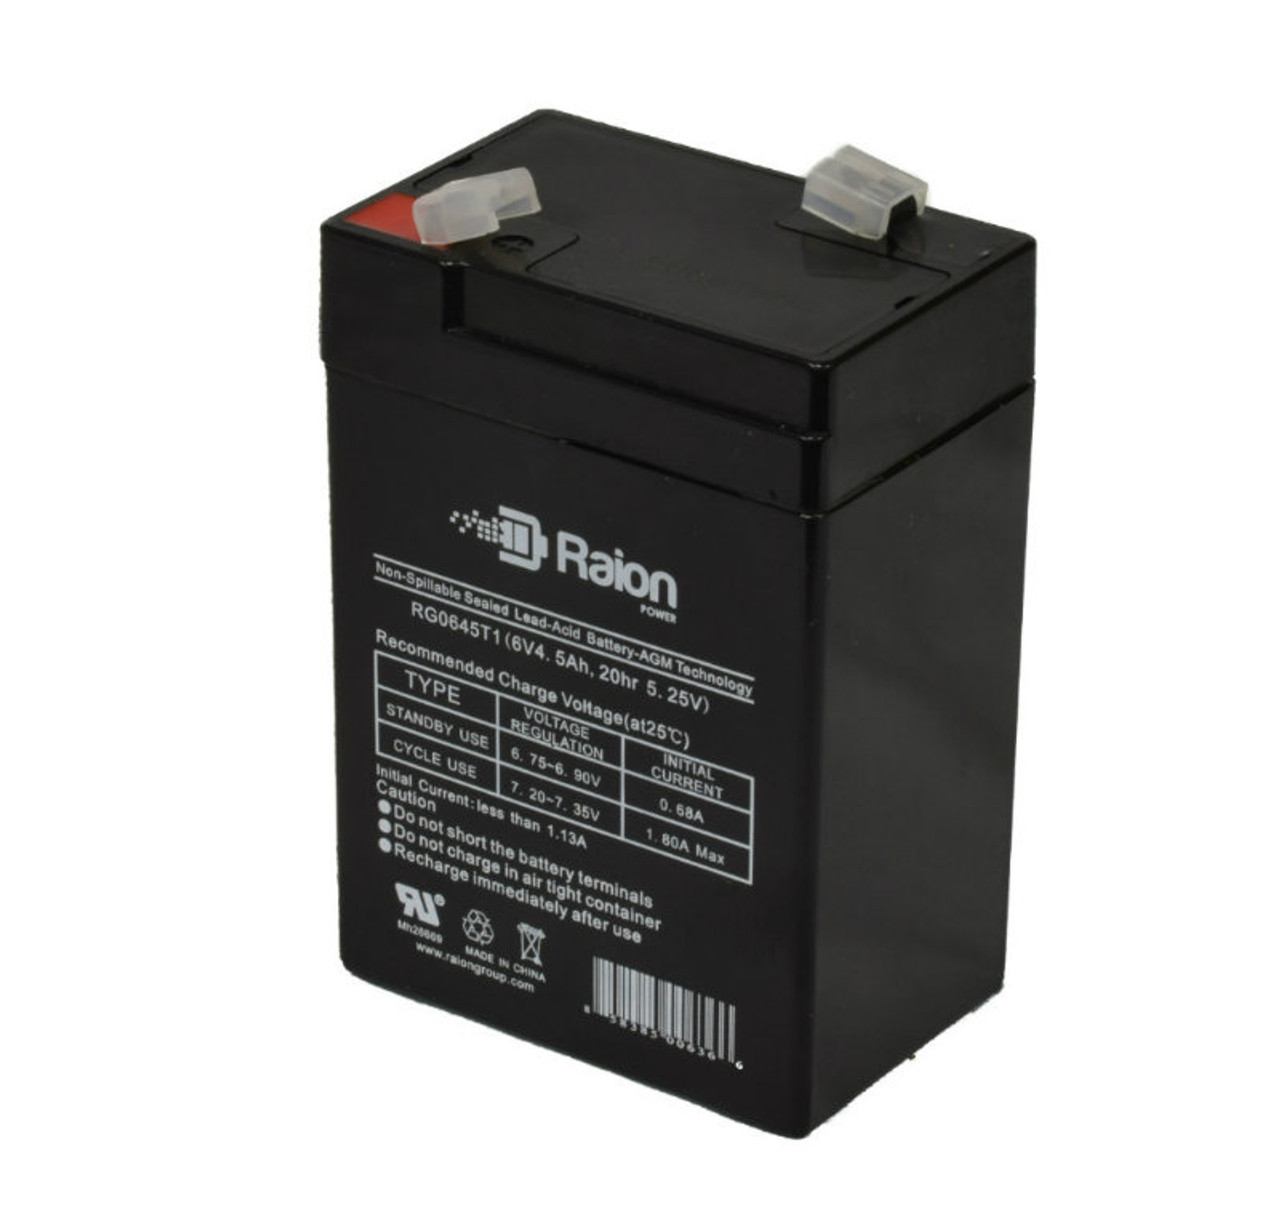 Raion Power RG0645T1 6V 4.5Ah Replacement Battery Cartridge for Delta DT 6045